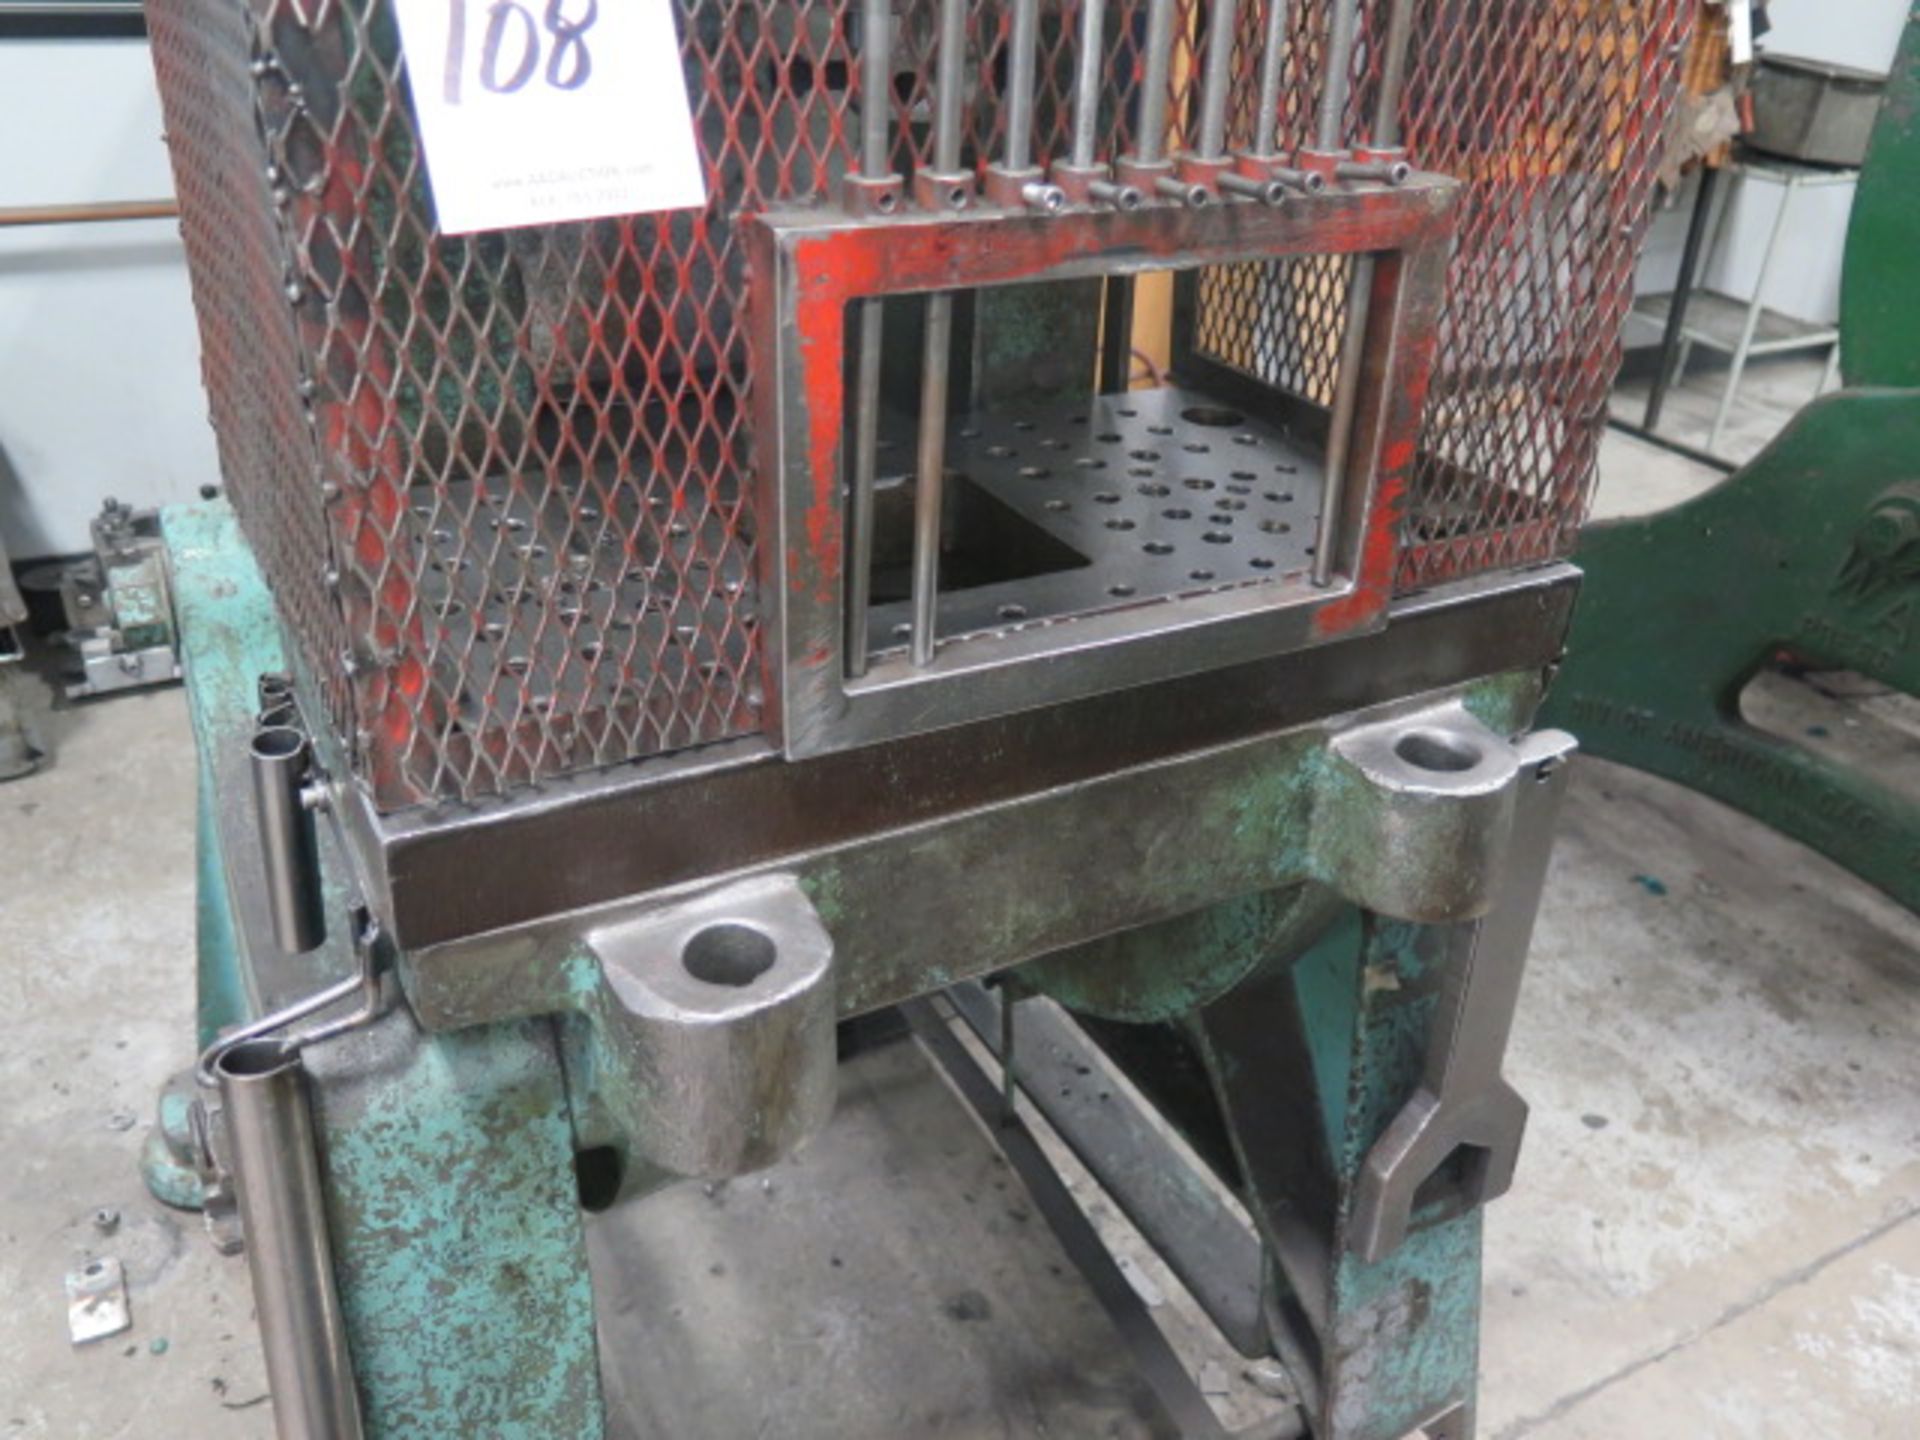 Press Rite No.30 30 Ton OBI Stamping Press s/n 2590 (AS IS - PARTS ONLY) - Image 5 of 6